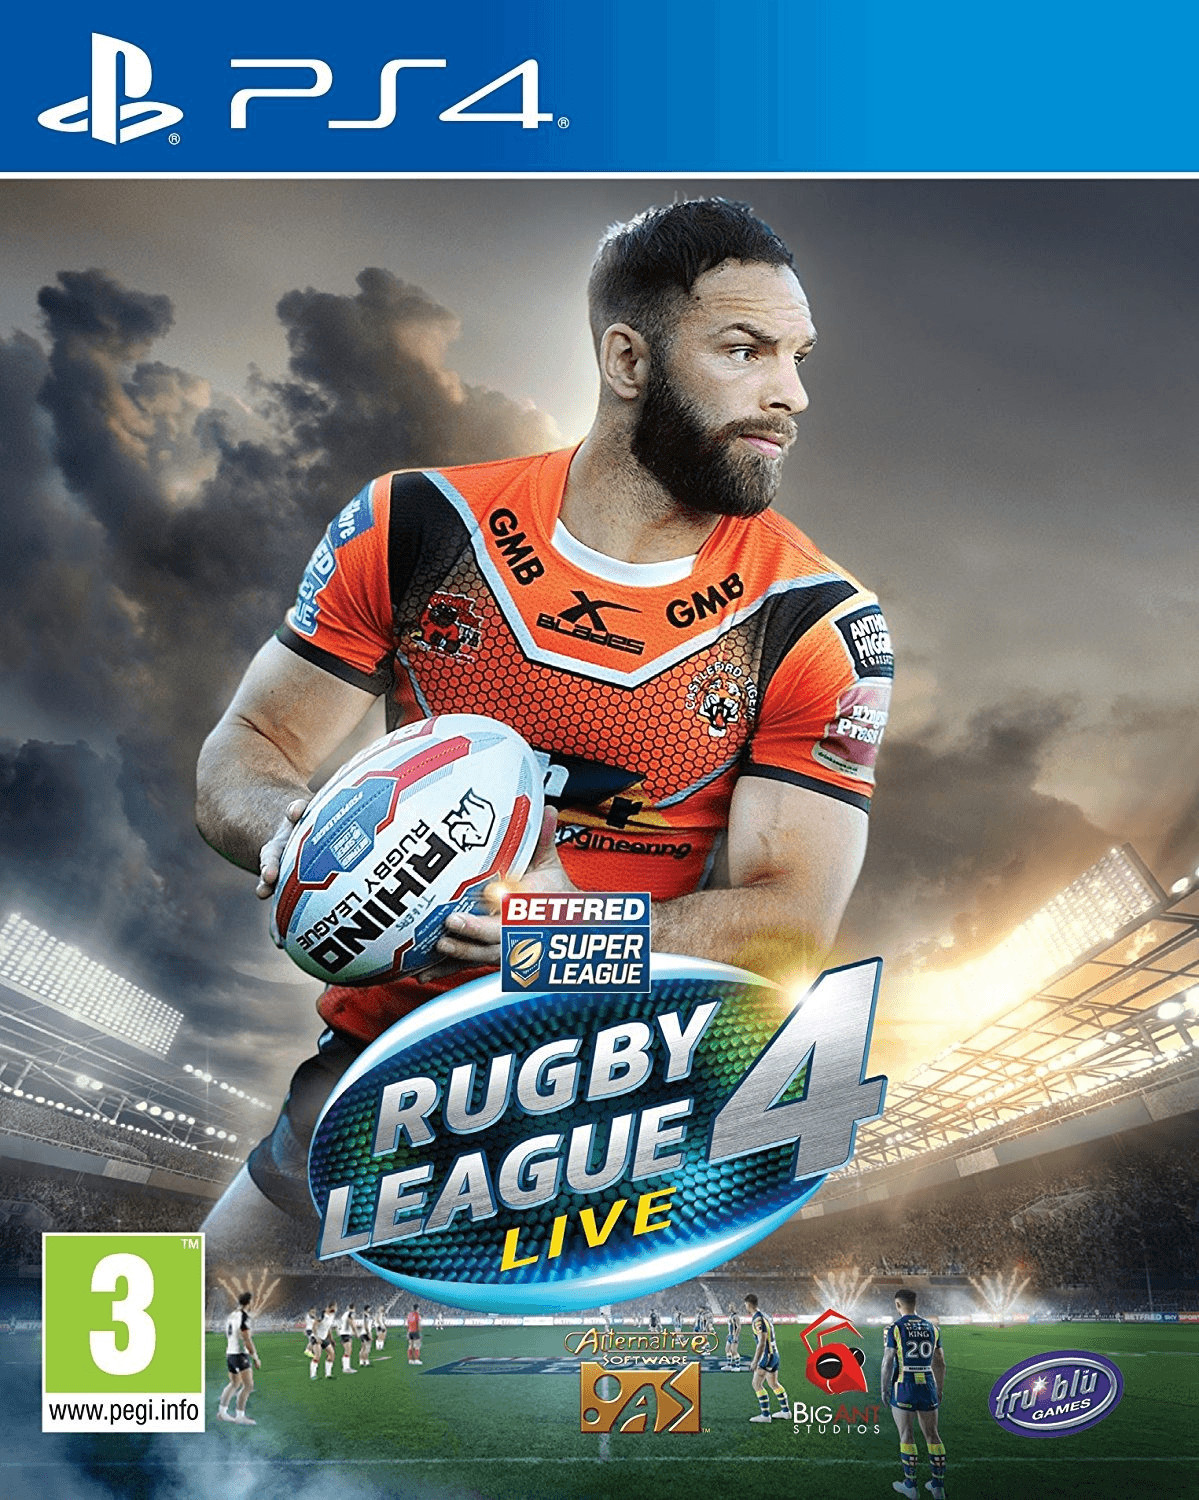 Buy Rugby League Live 4 (PS4) from £46.99 (Today) Best Deals on